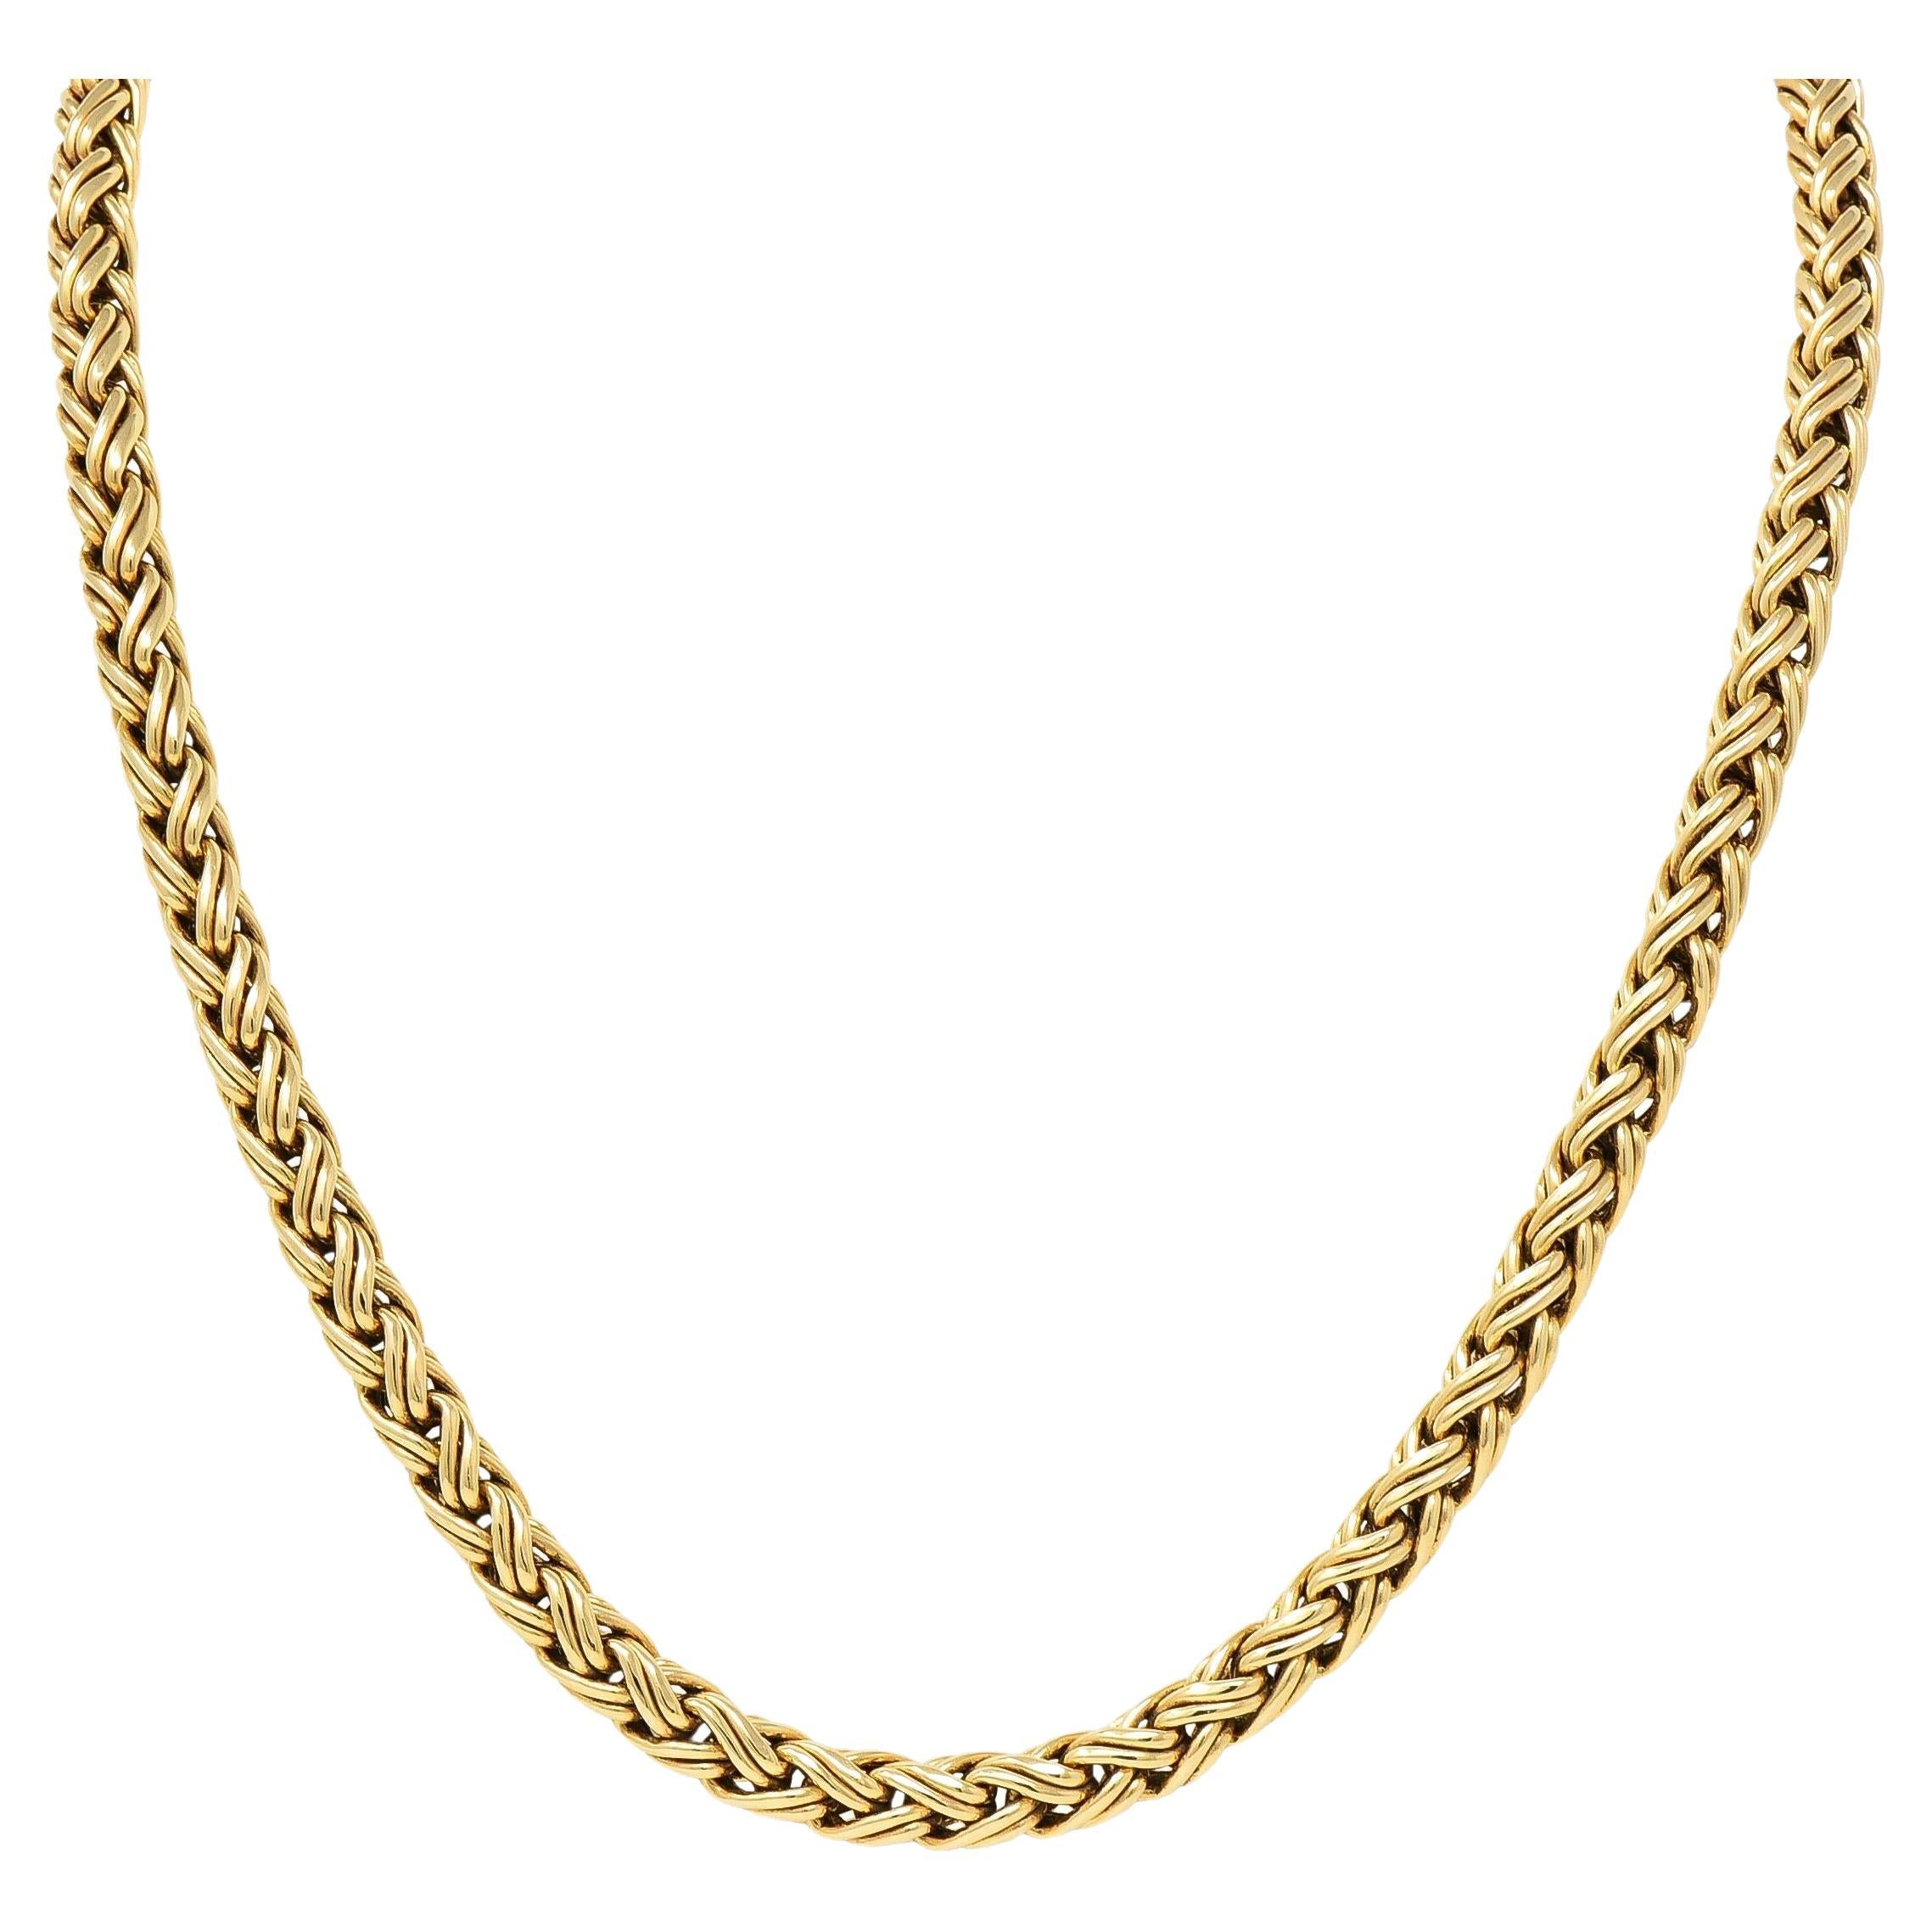 Tiffany & Co. 1990's 14 Karat Yellow Gold Russian Weave Vintage Chain Necklace